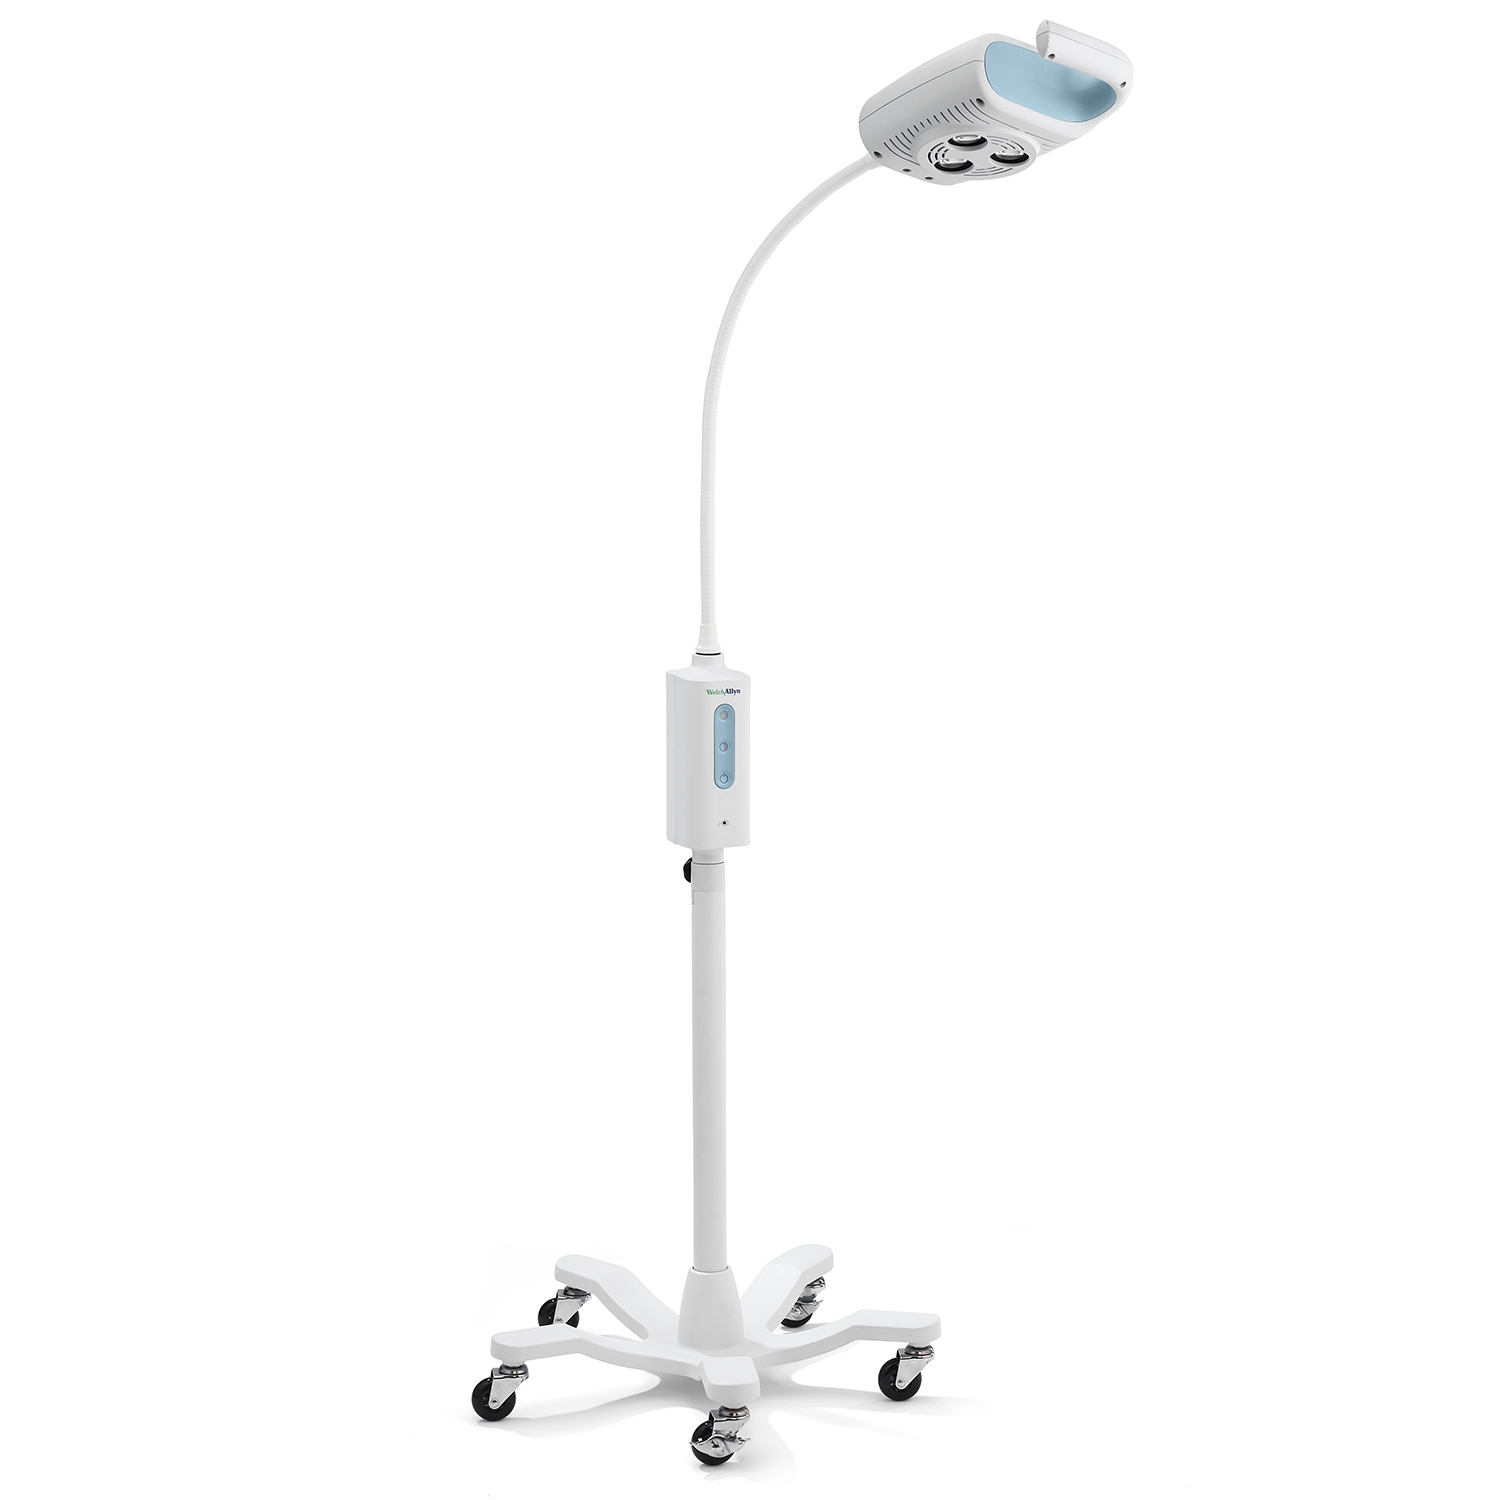 Welch Allyn lampe d'examen GS600 LED + pied roulant